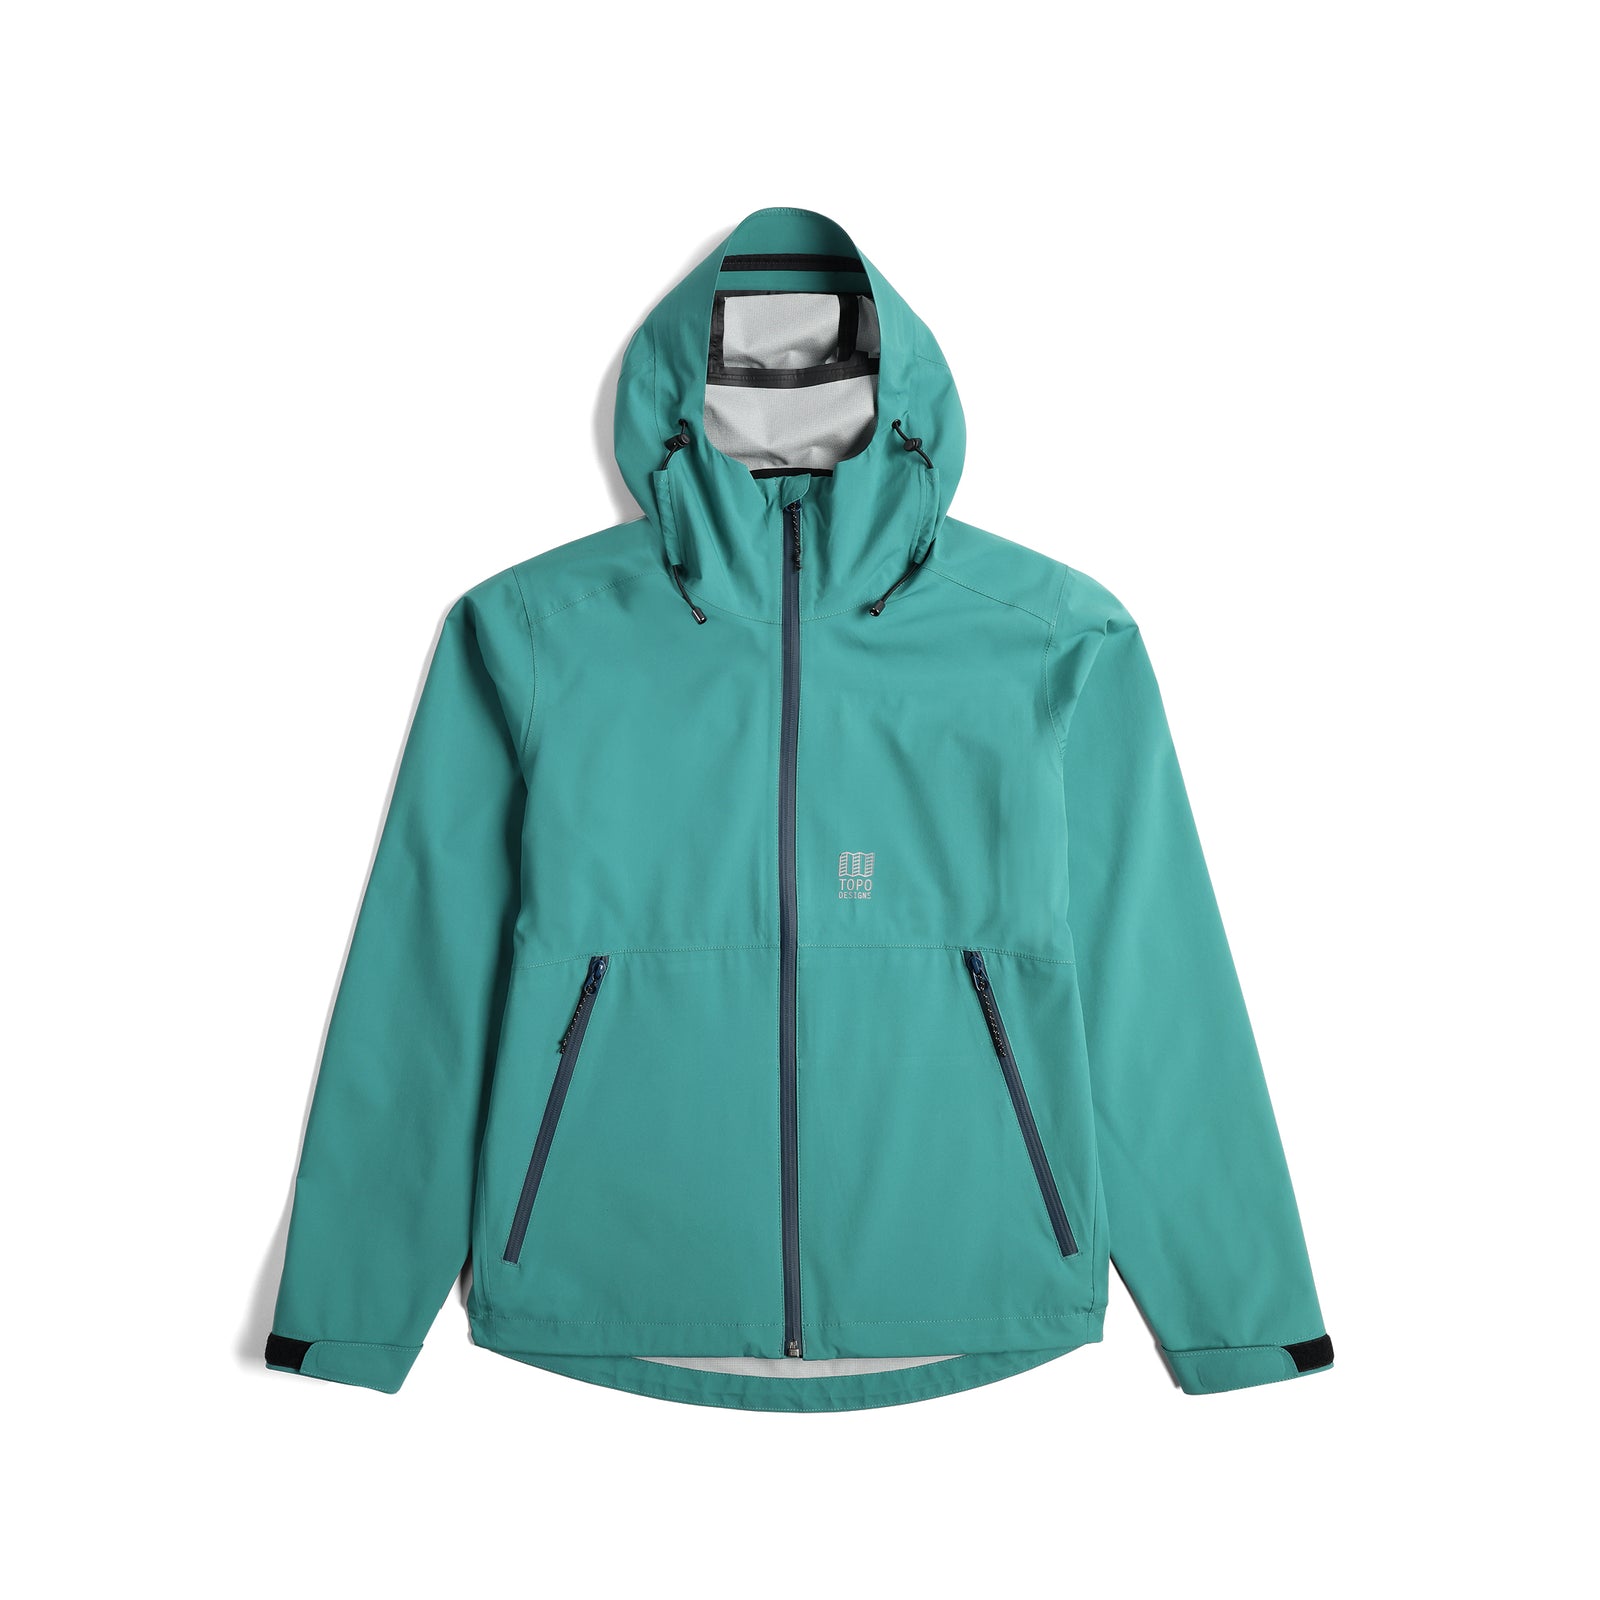 Front View of Topo Designs Global Jacket - Women's in "Caribbean"